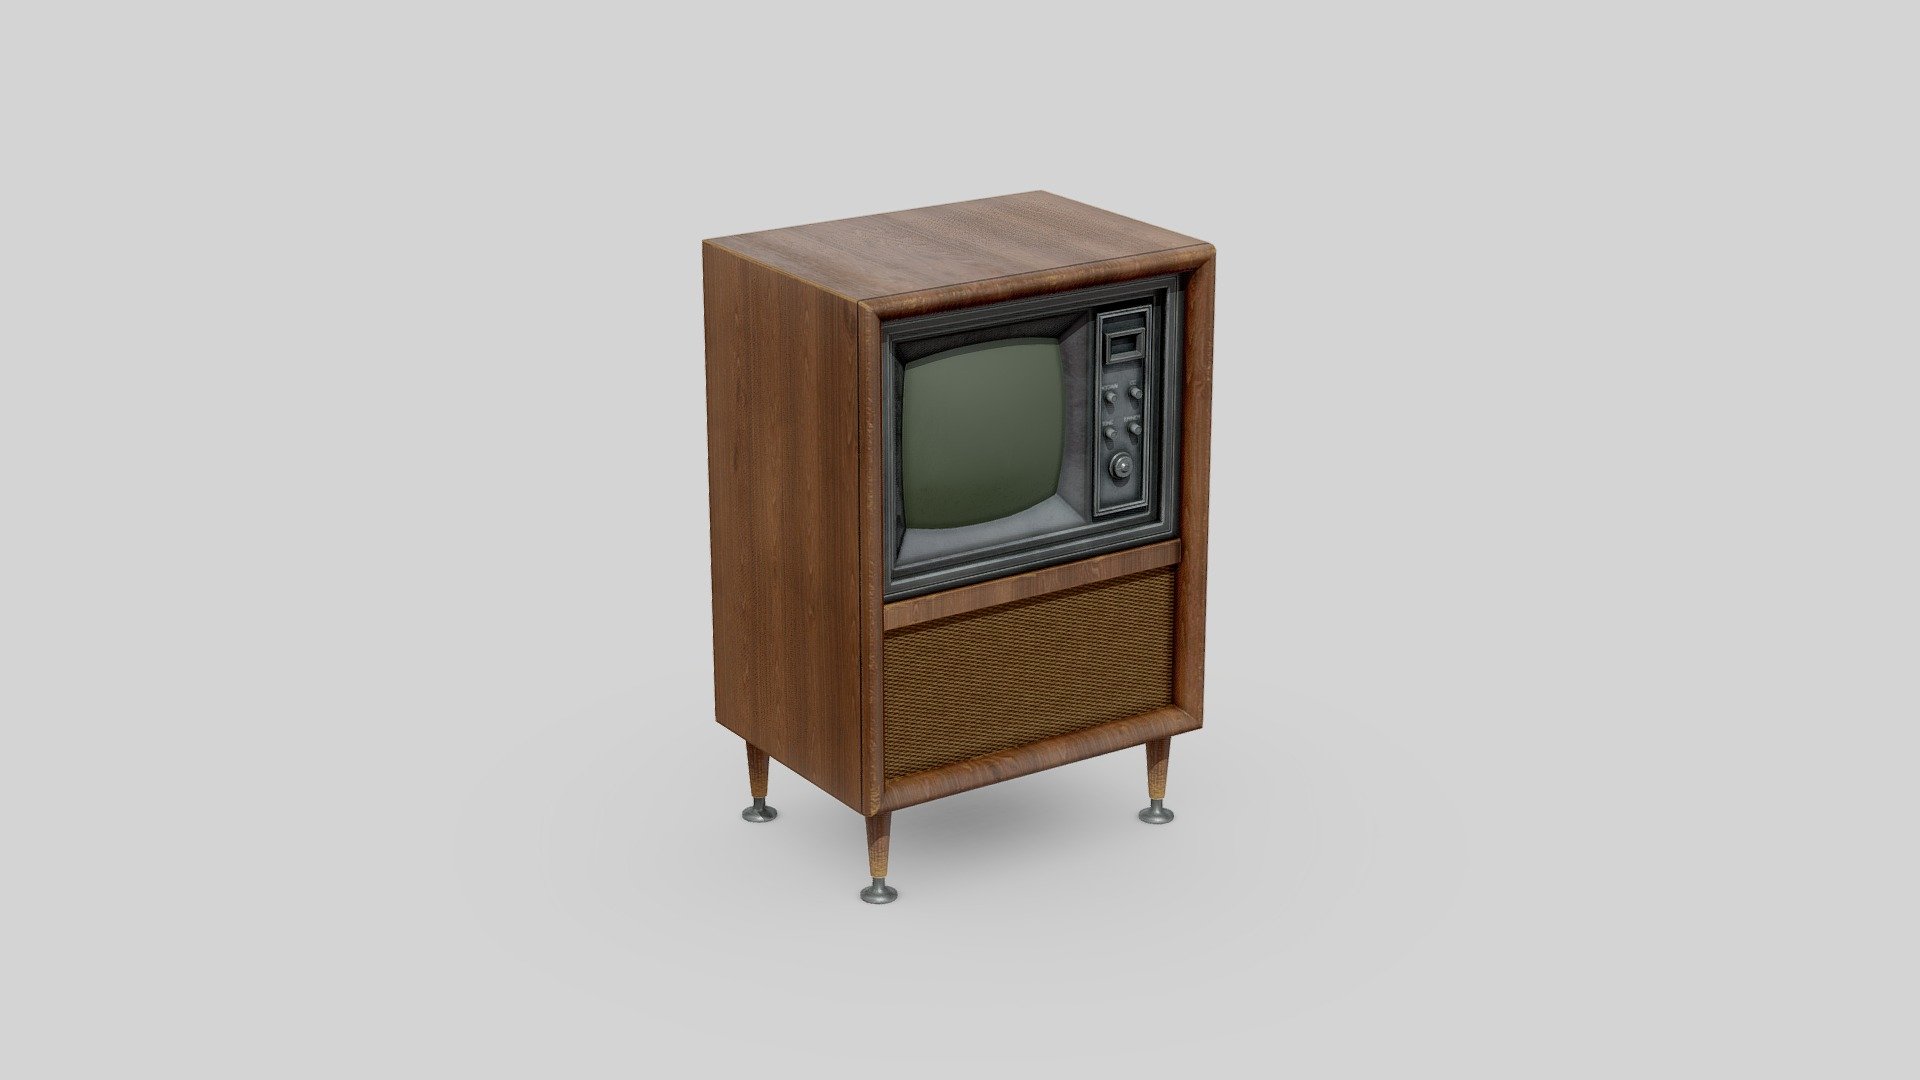 Free download：www.freepoly.org - Old TV-Freepoly.org - Download Free 3D model by Freepoly.org (@blackrray) 3d model